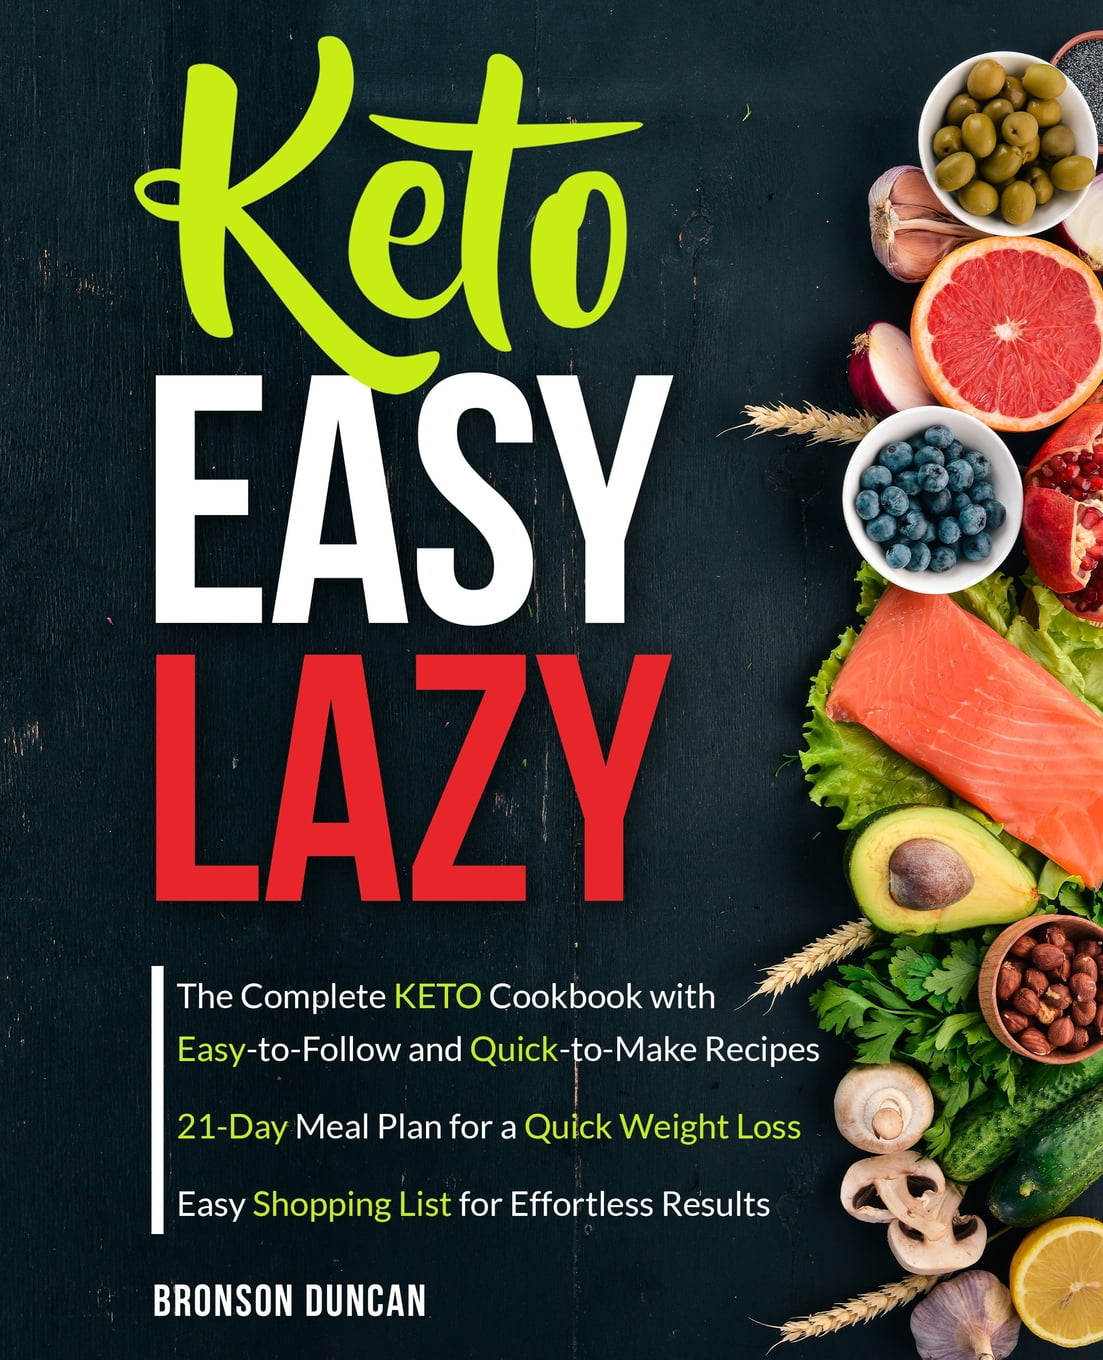 keto-diet-cookbook-keto-easy-lazy-the-complete-keto-cookbook-with